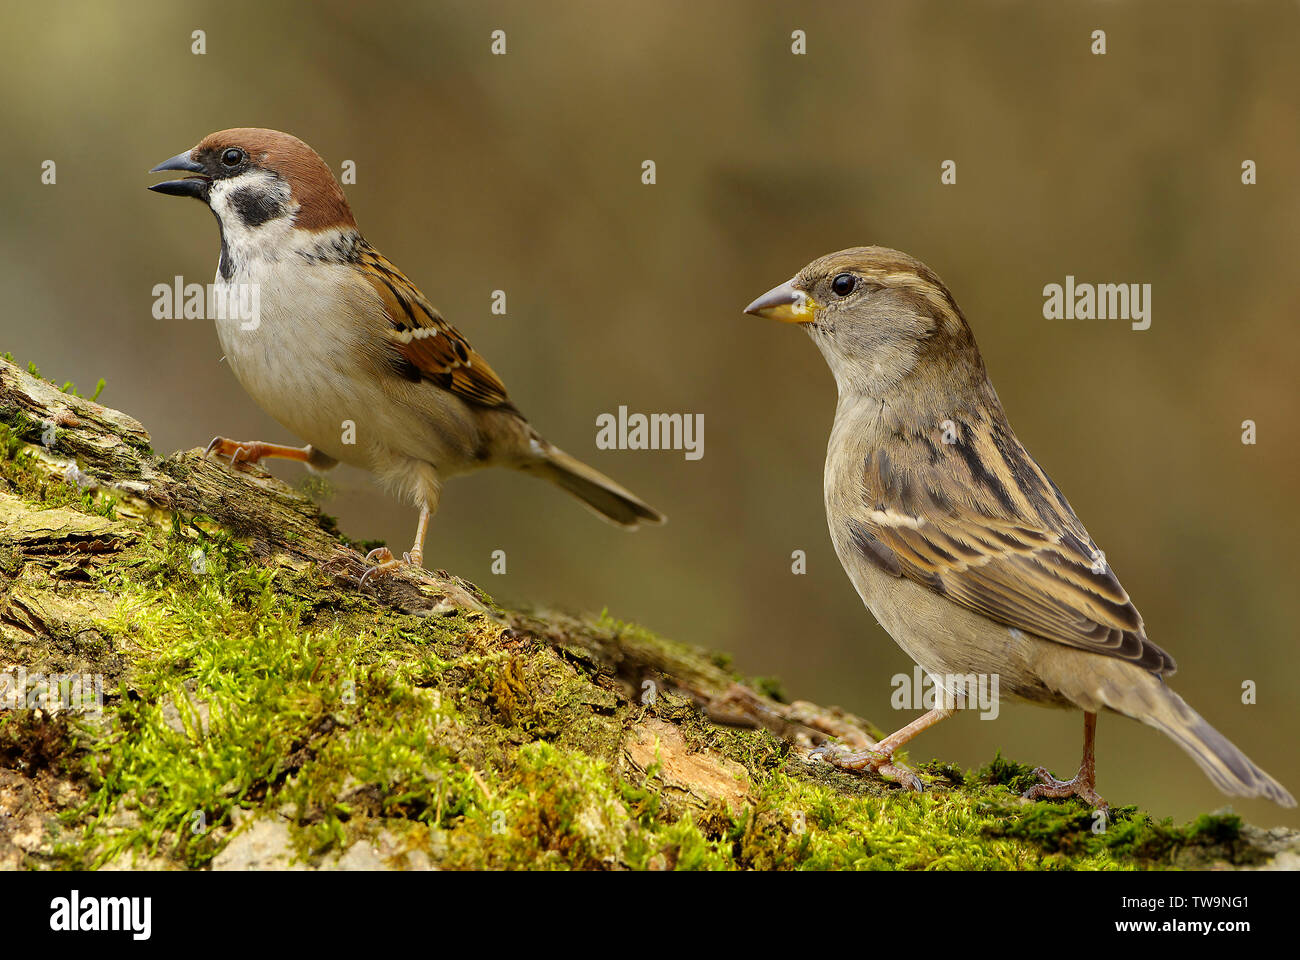 Tree Sparrow (Passer montanus, left) and female House Sparrow (Passer domesticus, right) on a mossy log. Germany Stock Photo